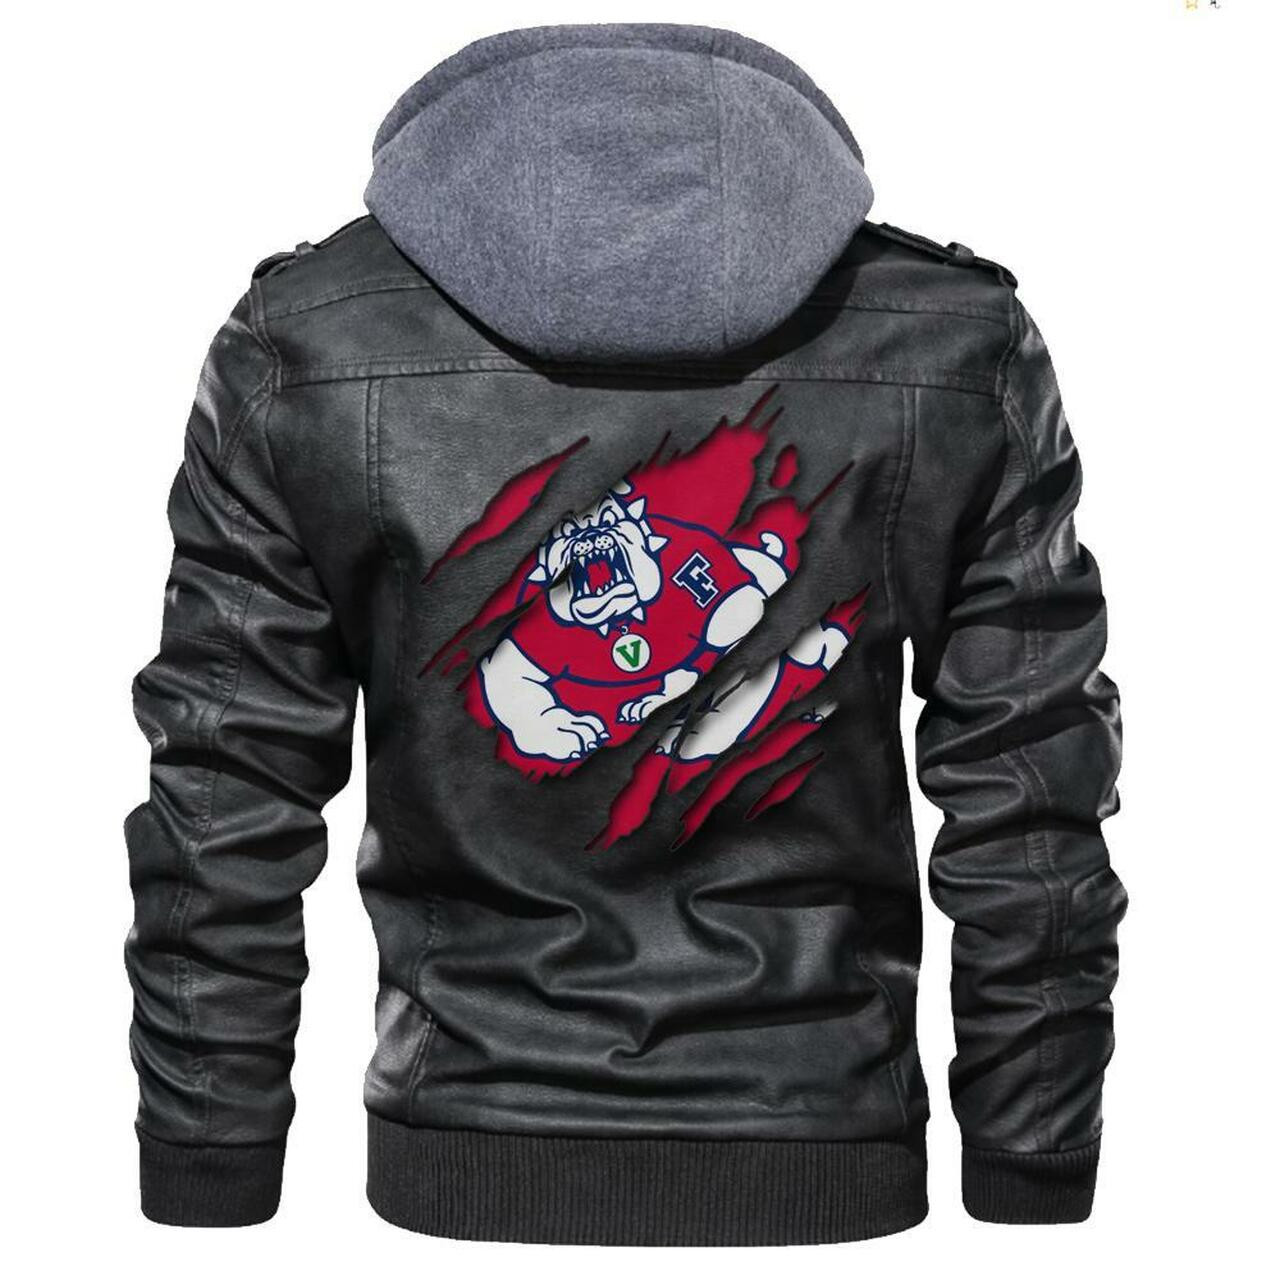 You can find Leather Jacket online at a great price 24